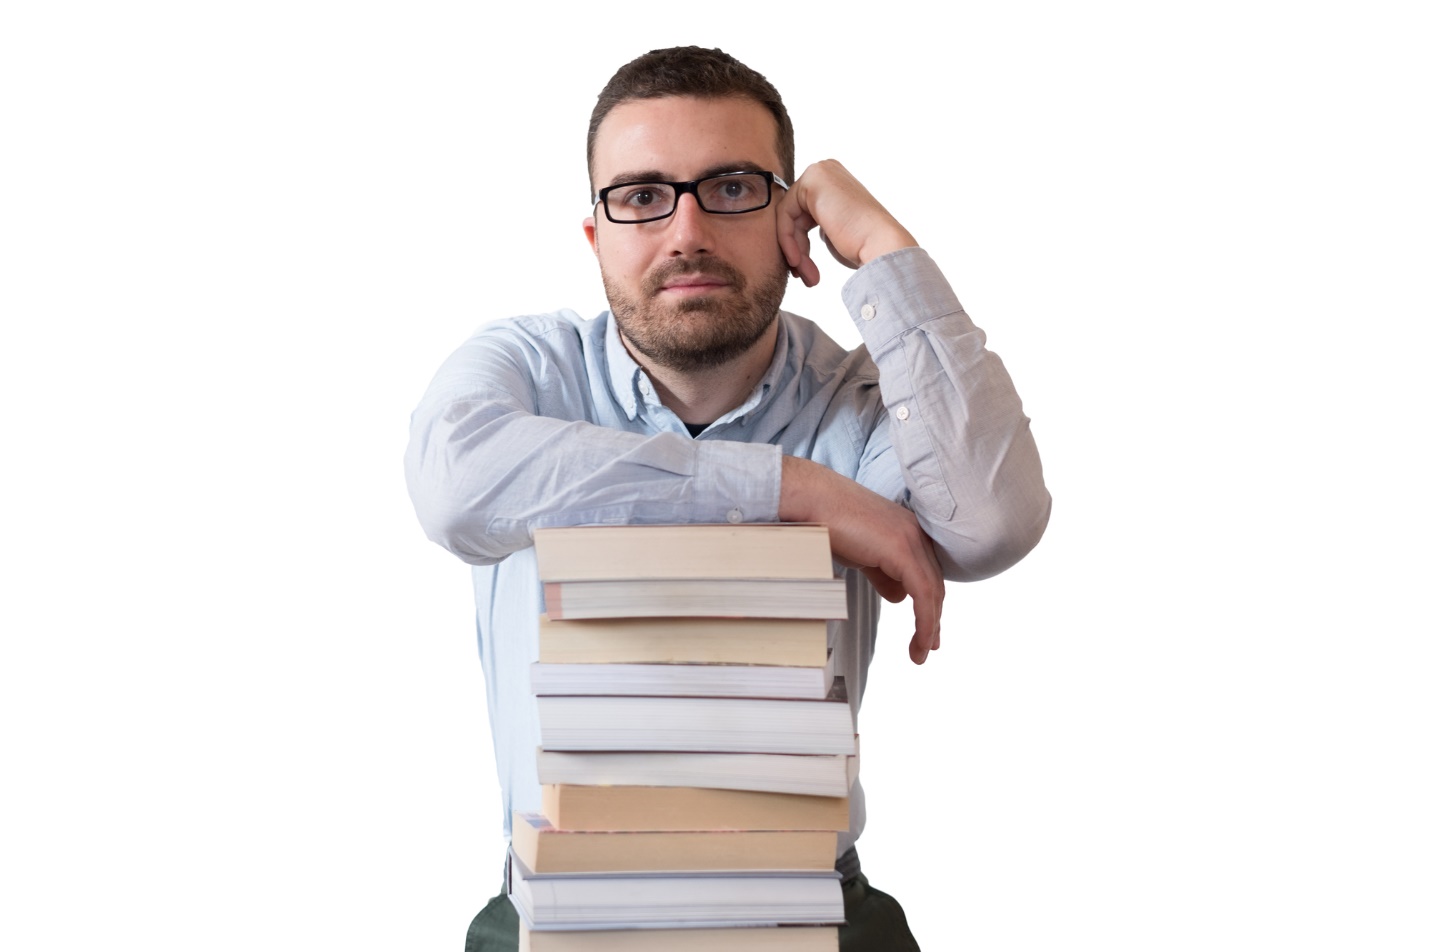 A person holding a stack of books

Description automatically generated